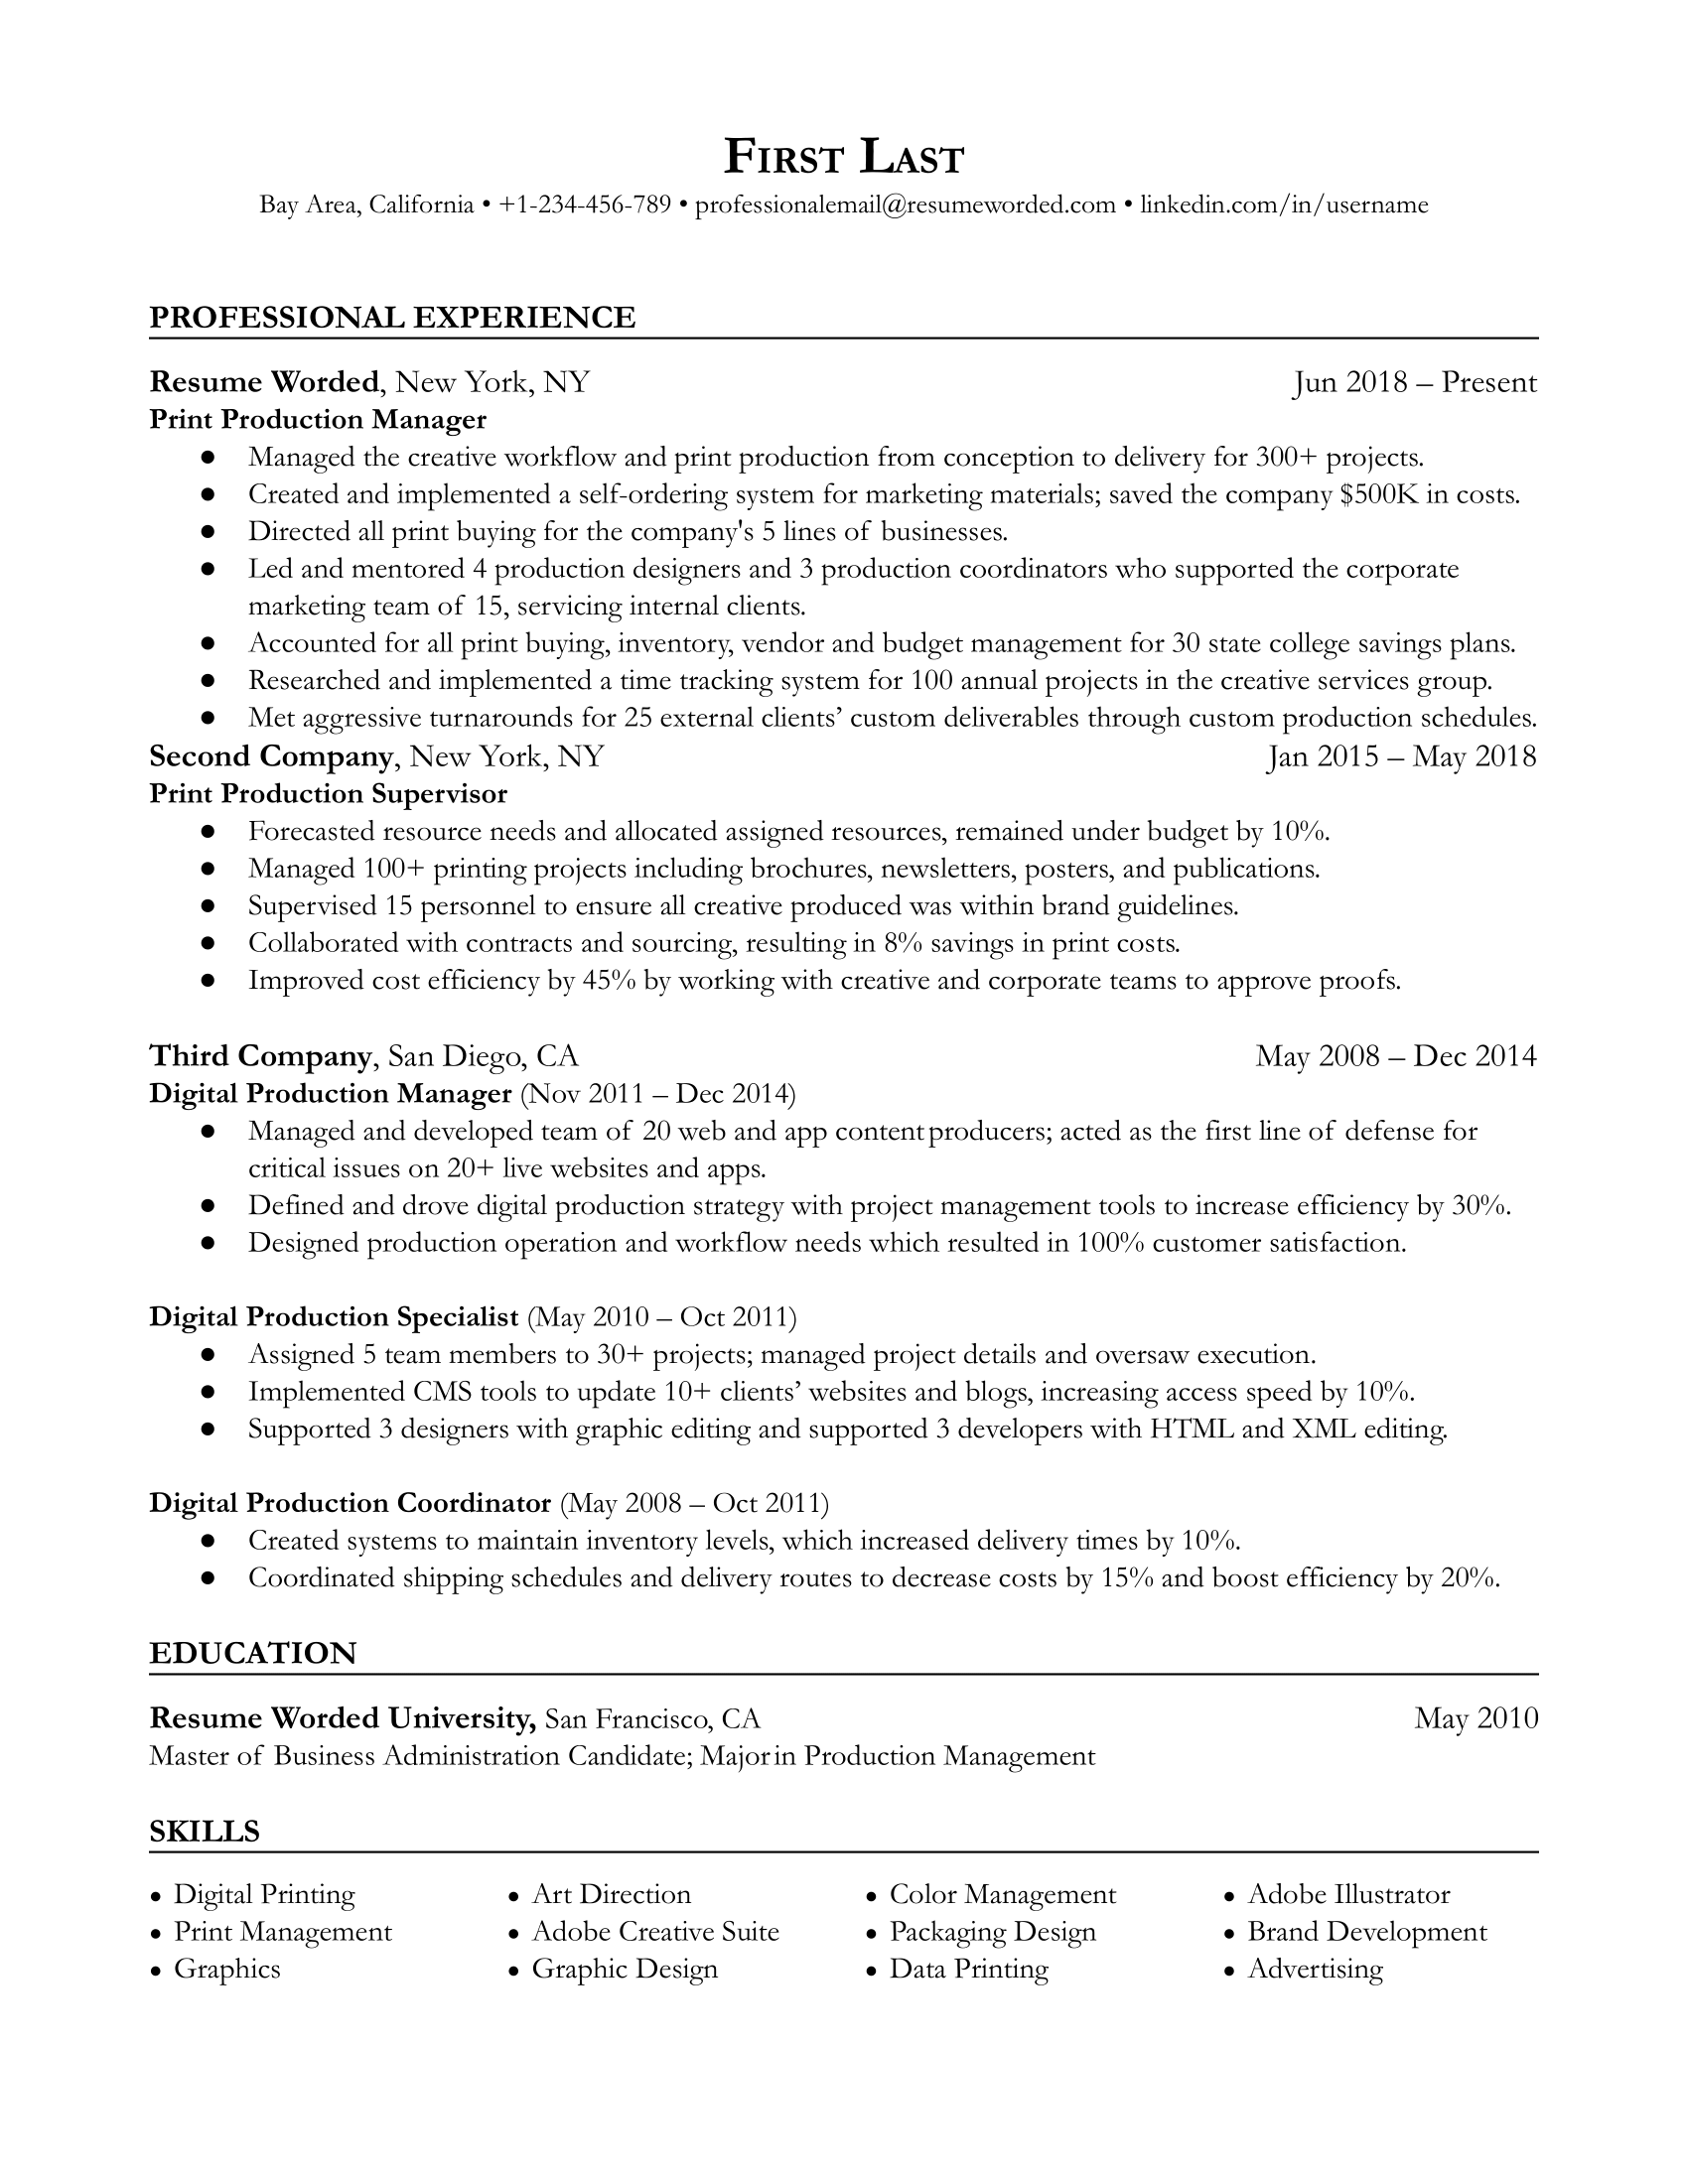 Print Production Manager resume highlighting technical expertise and project management skills